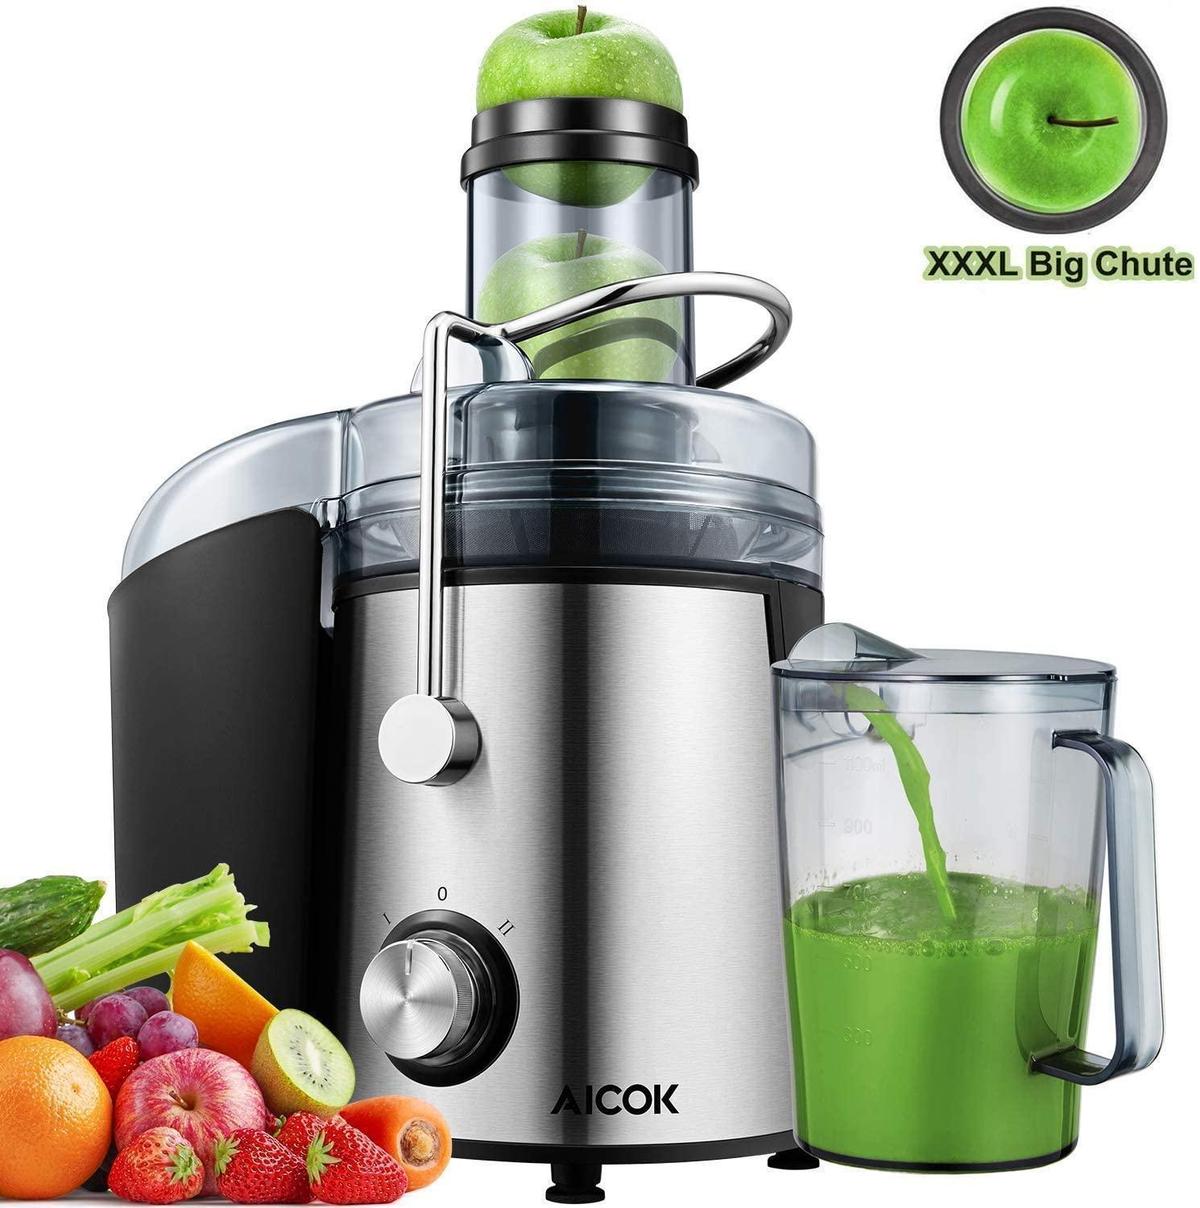 Aicok Juicer Extractor 1000W Centrifugal Juicer Machines (GS-332) - $65.99 MSRP